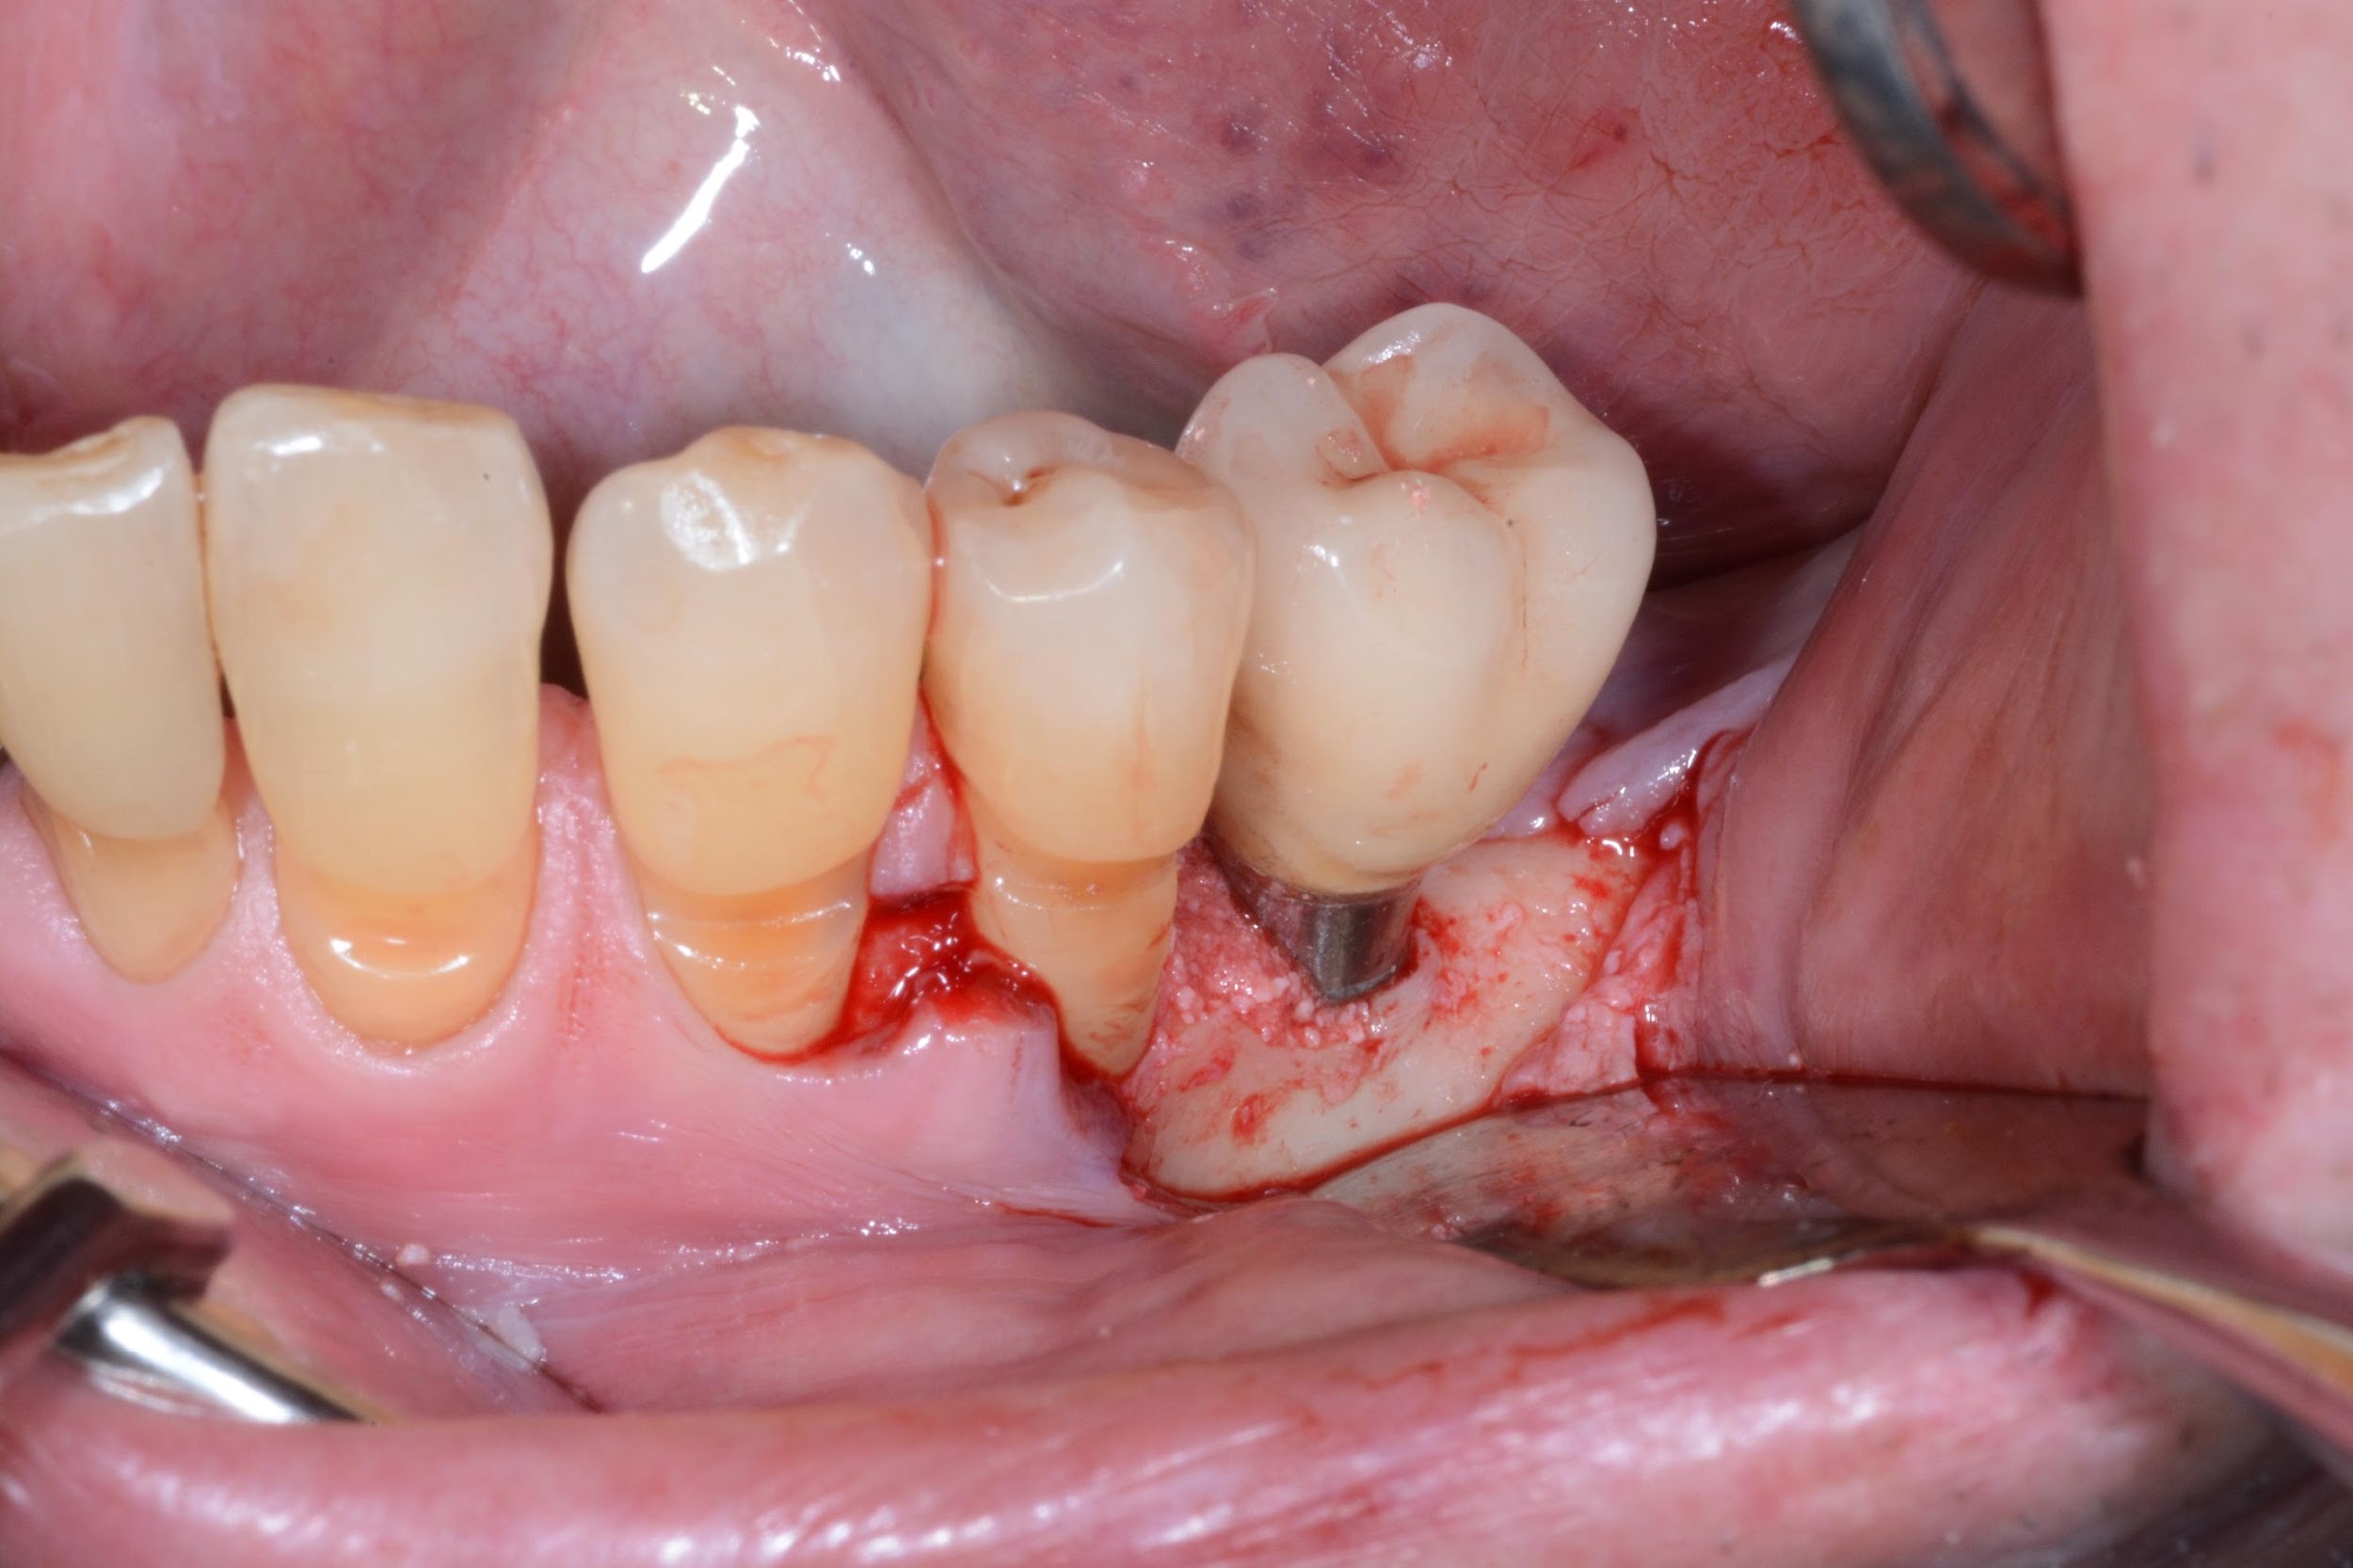 Clinical view of the peri-implant defect filled with a 